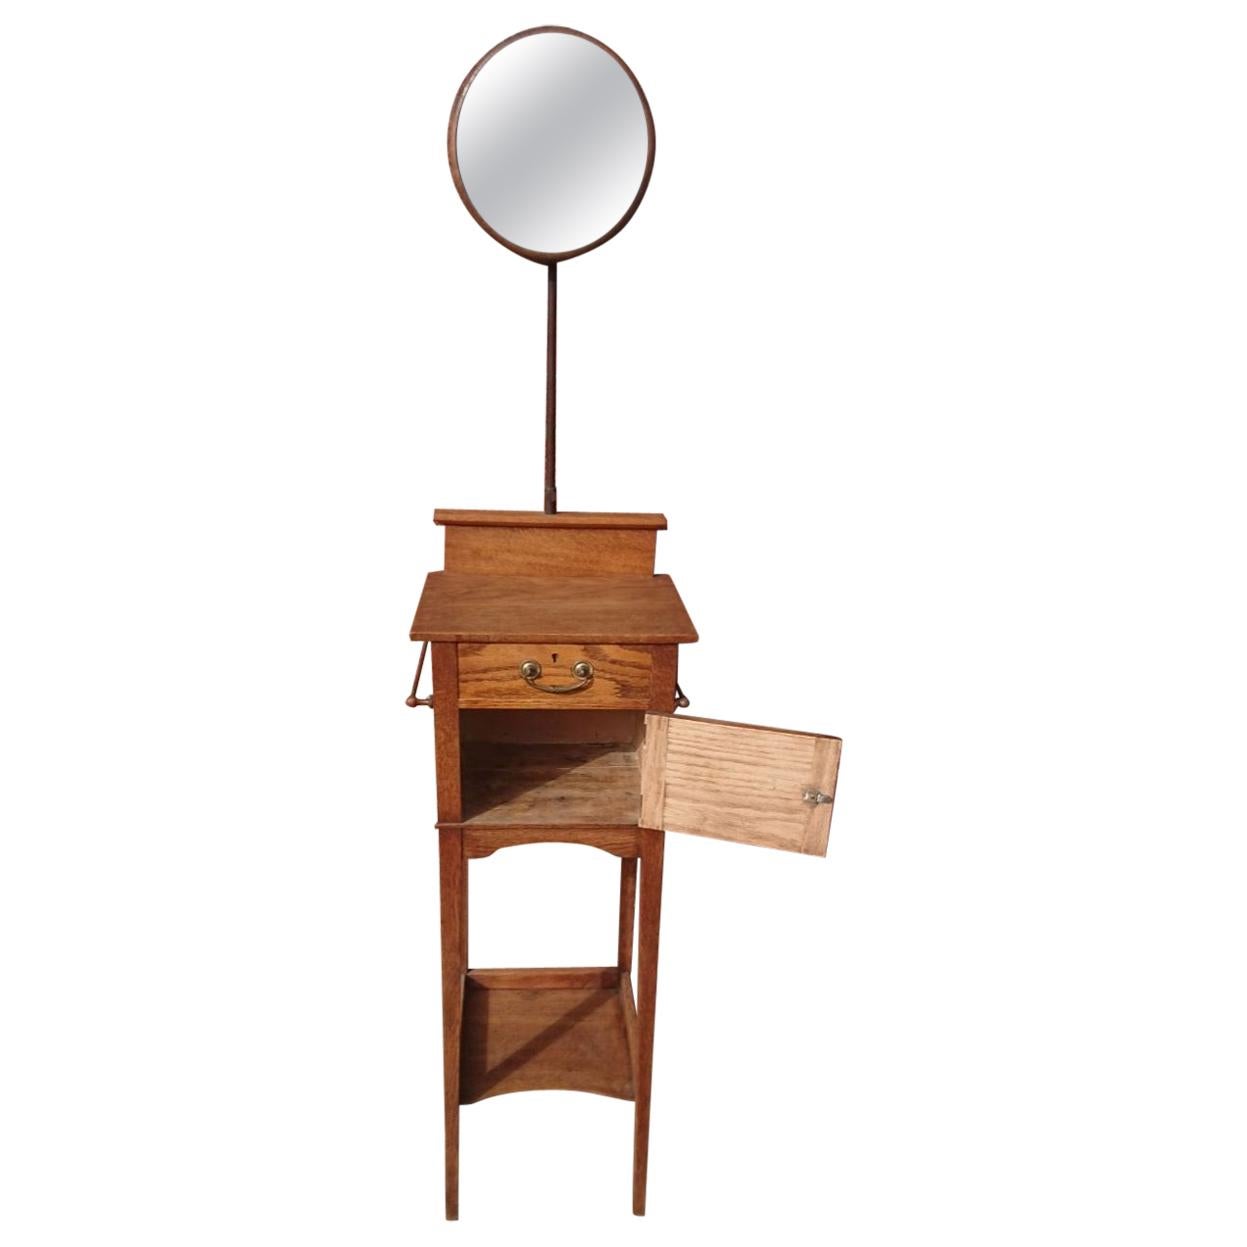 Shapland & Petter, Attributed, Arts & Crafts Gentleman's Wash or Shaving Stand For Sale